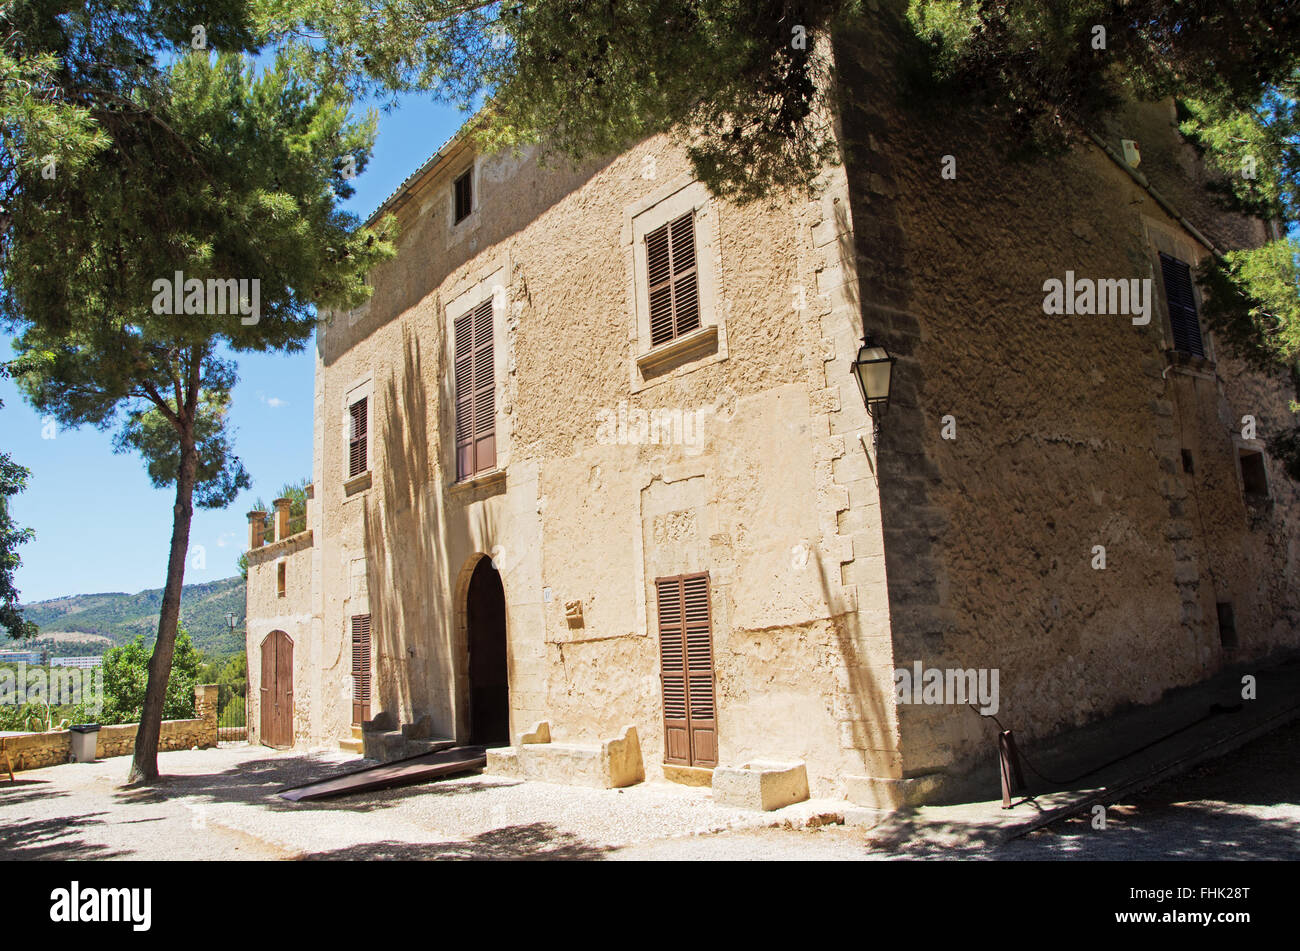 Mallorca, Balearic Islands, Spain, Europe: Finca Son Boter of the Pilar and Joan Miró Foundation, the museum dedicated to the work of Joan Miró Stock Photo